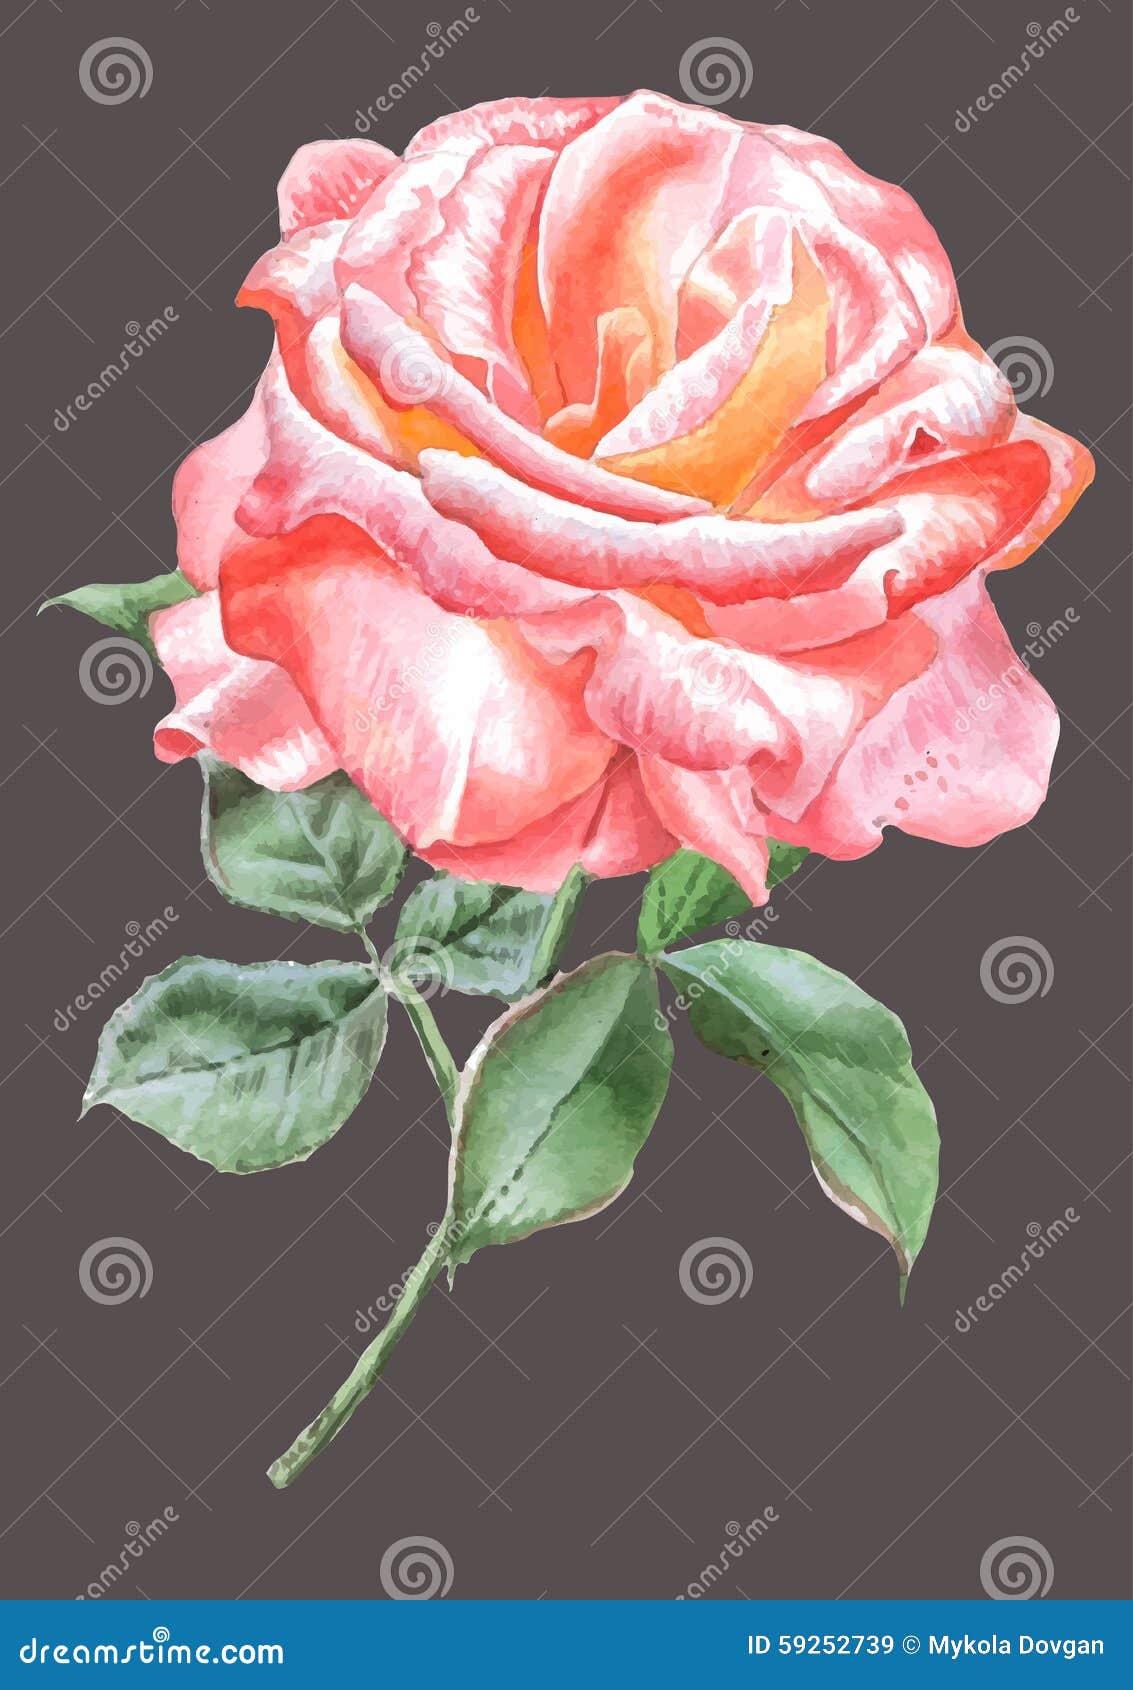 Realistic Red Rose. Watercolor. Stock Illustration - Illustration of ...